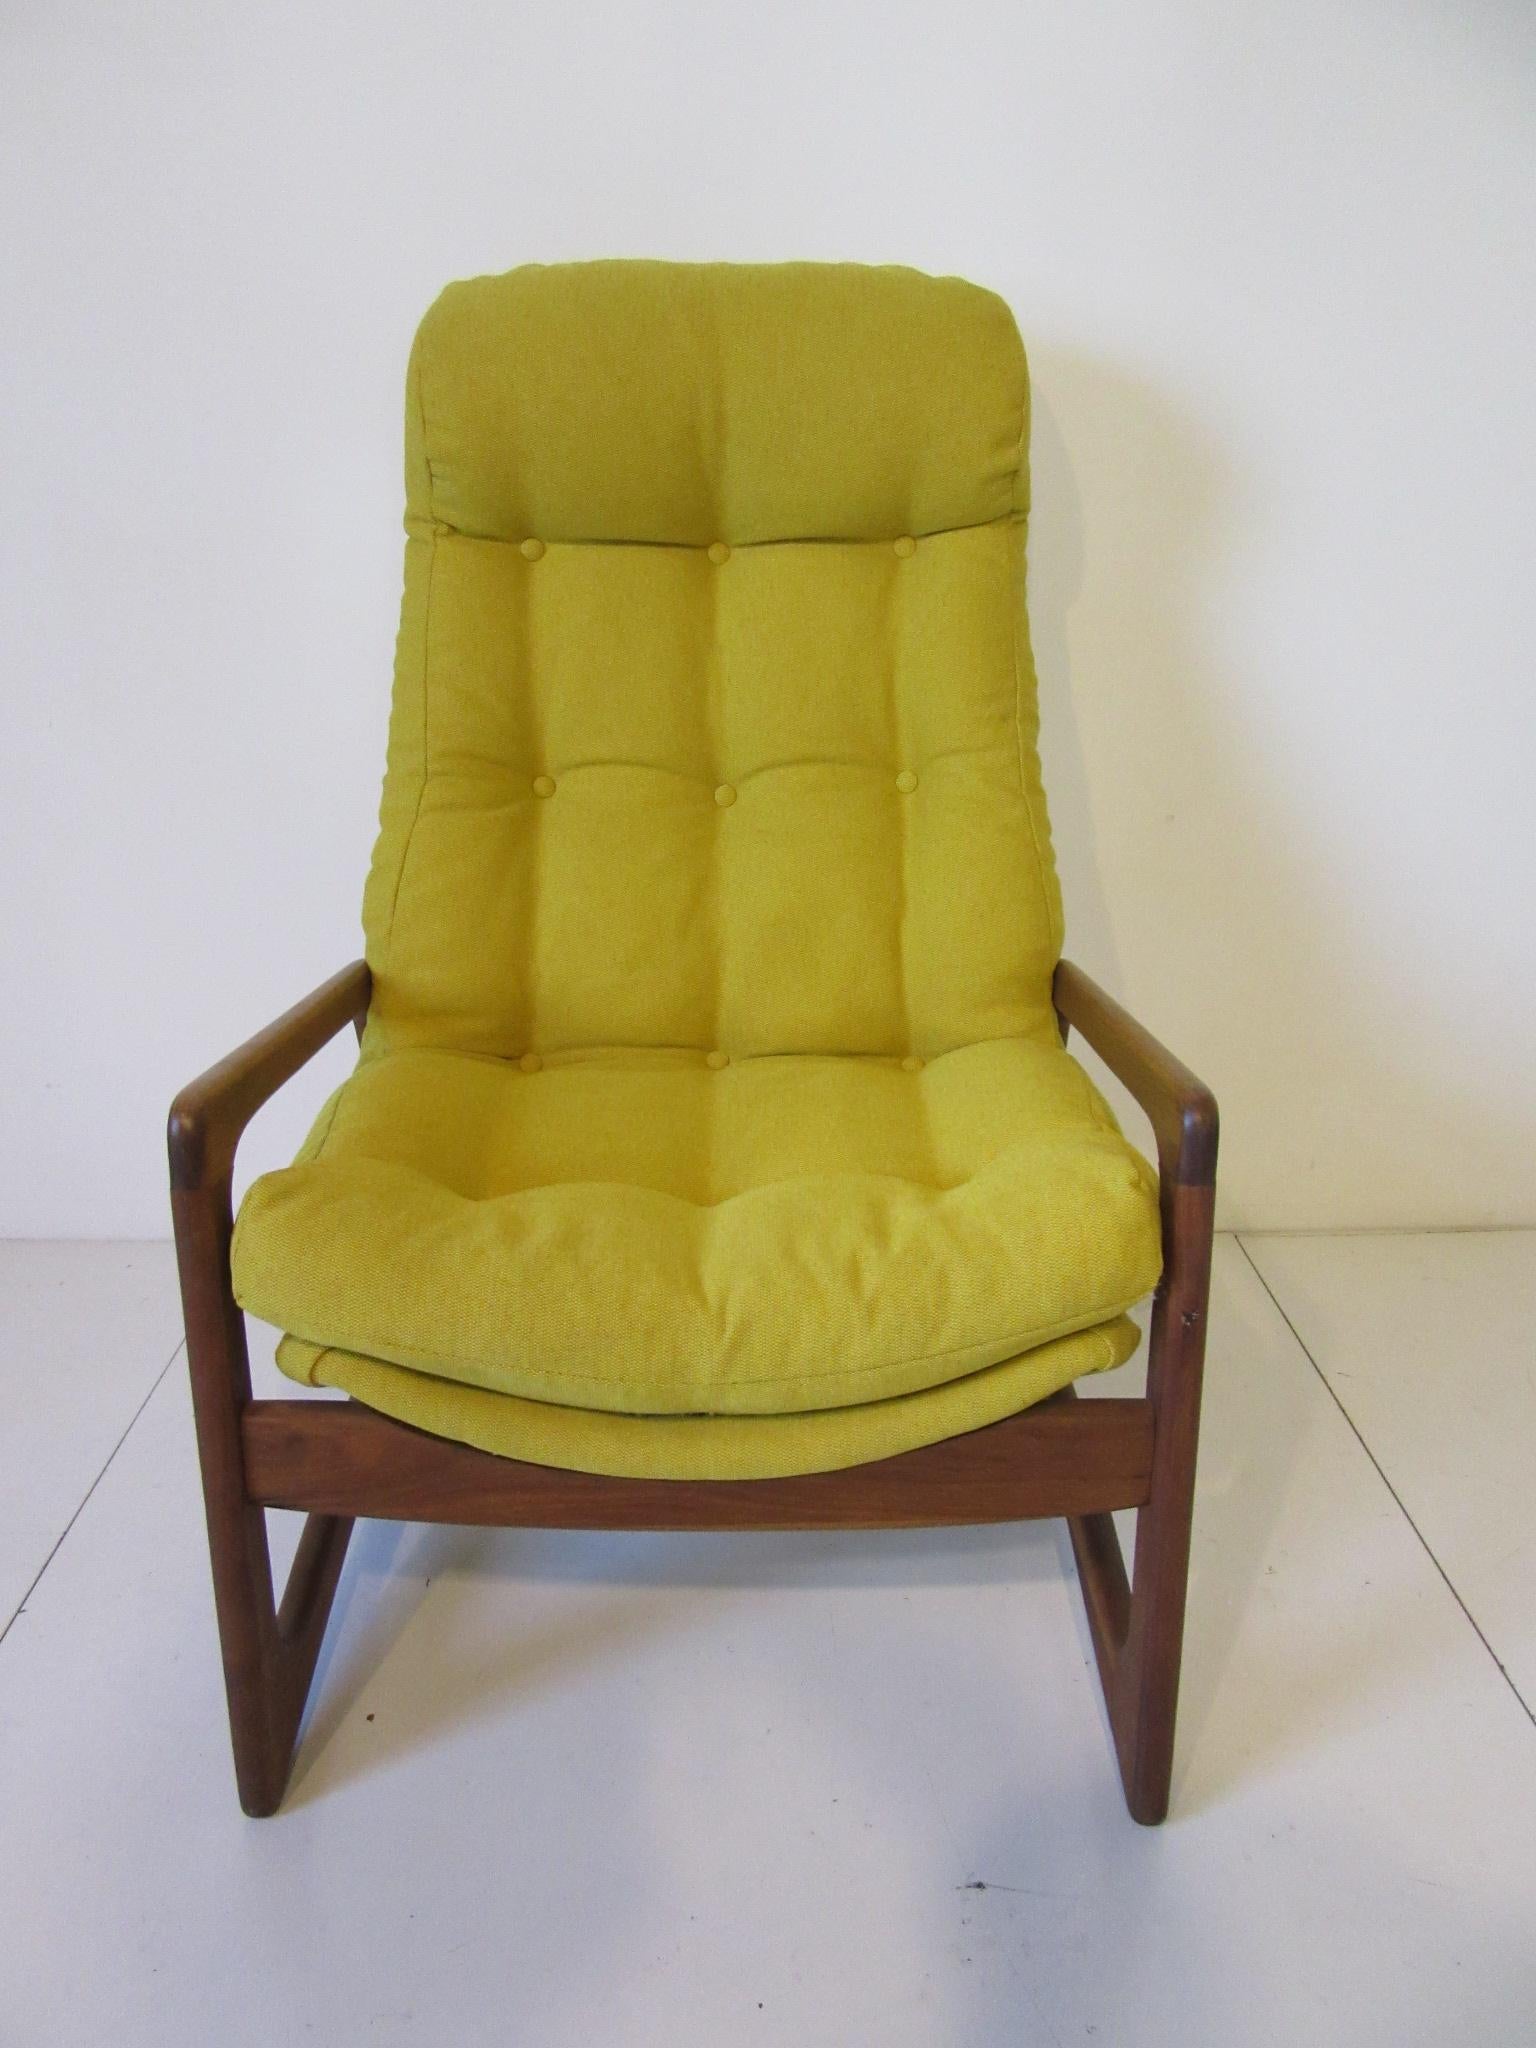 A sculptural solid walnut framed comfy lounge chair upholstered in a muted yellow fabric with button back and bottom details plus a built in headrest. A great form from the period by the American designer and craftsman Adrian Pearsall, manufactured